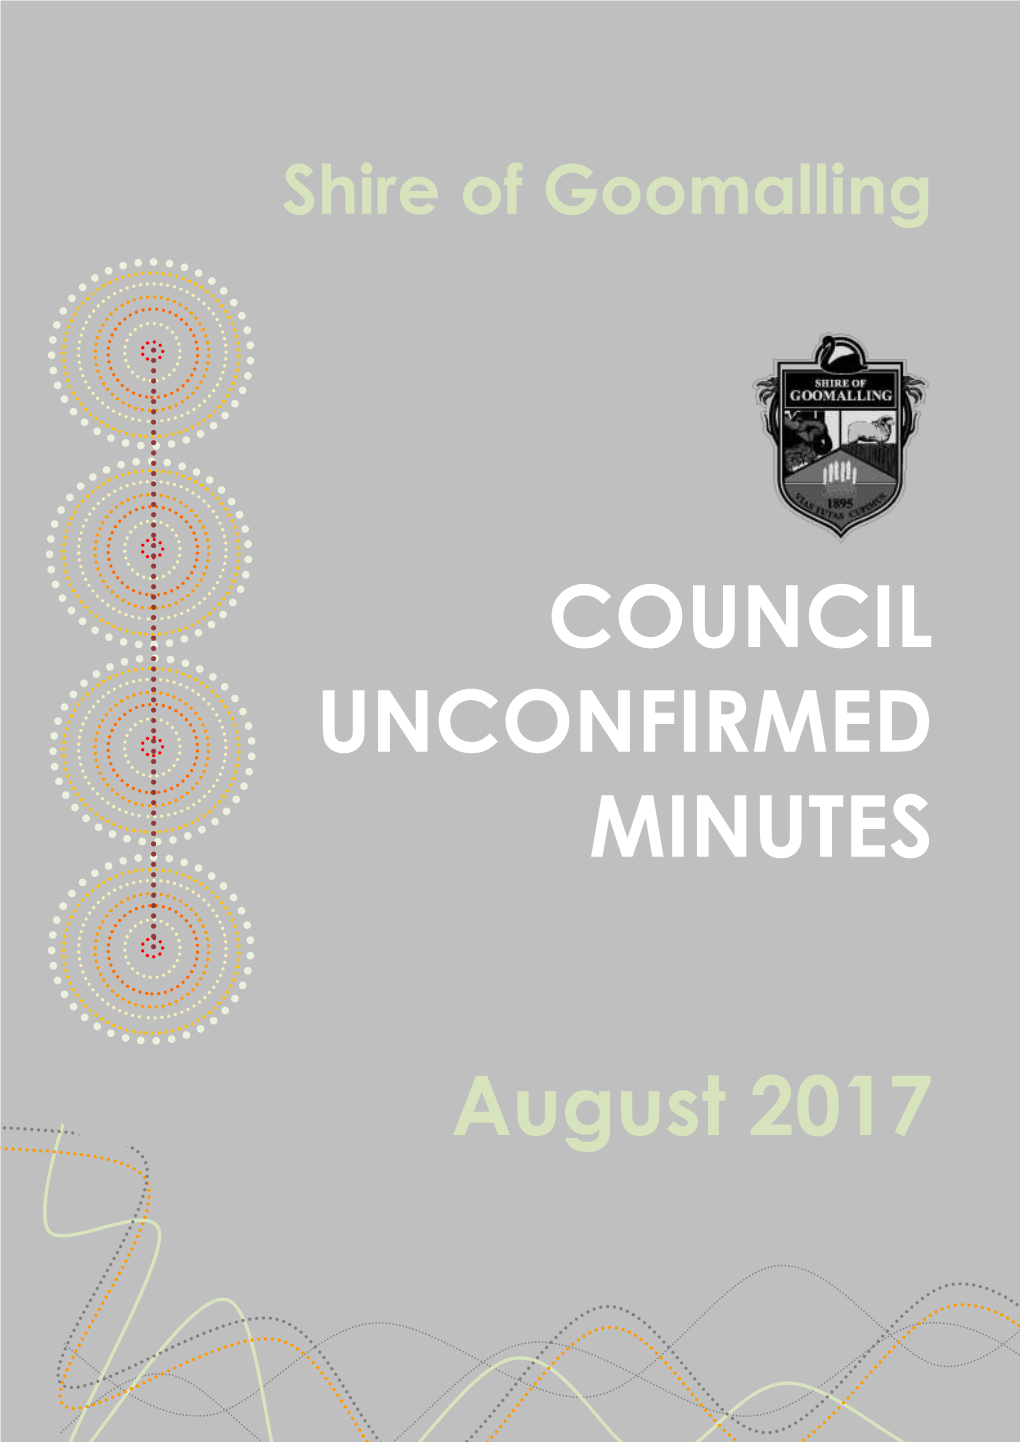 Council Meeting Minutes August 2017